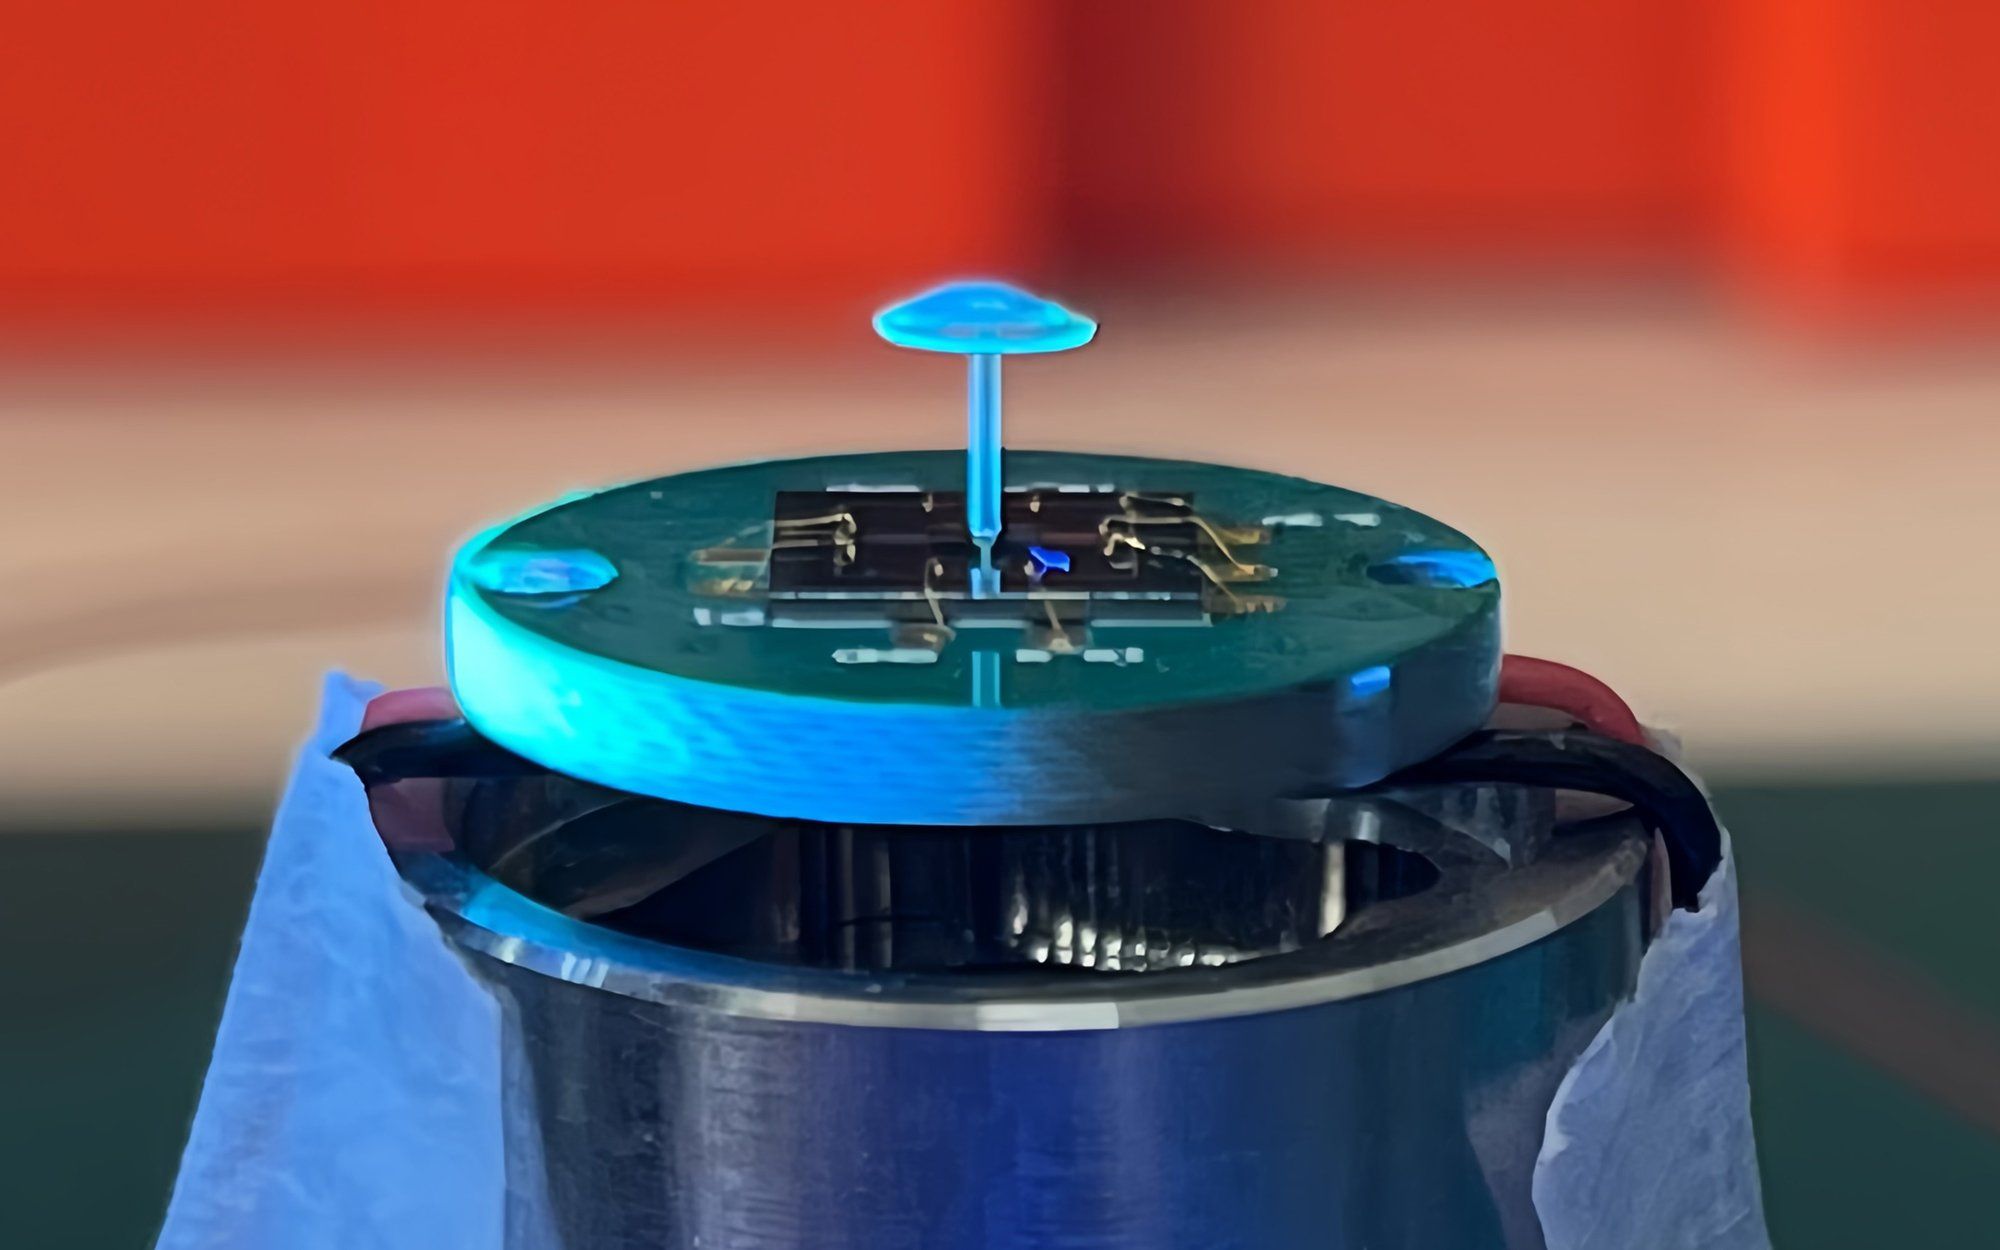 A device consisting of a circle with a chip on top and a mushroom shaped blue sensor standing upright on it. 